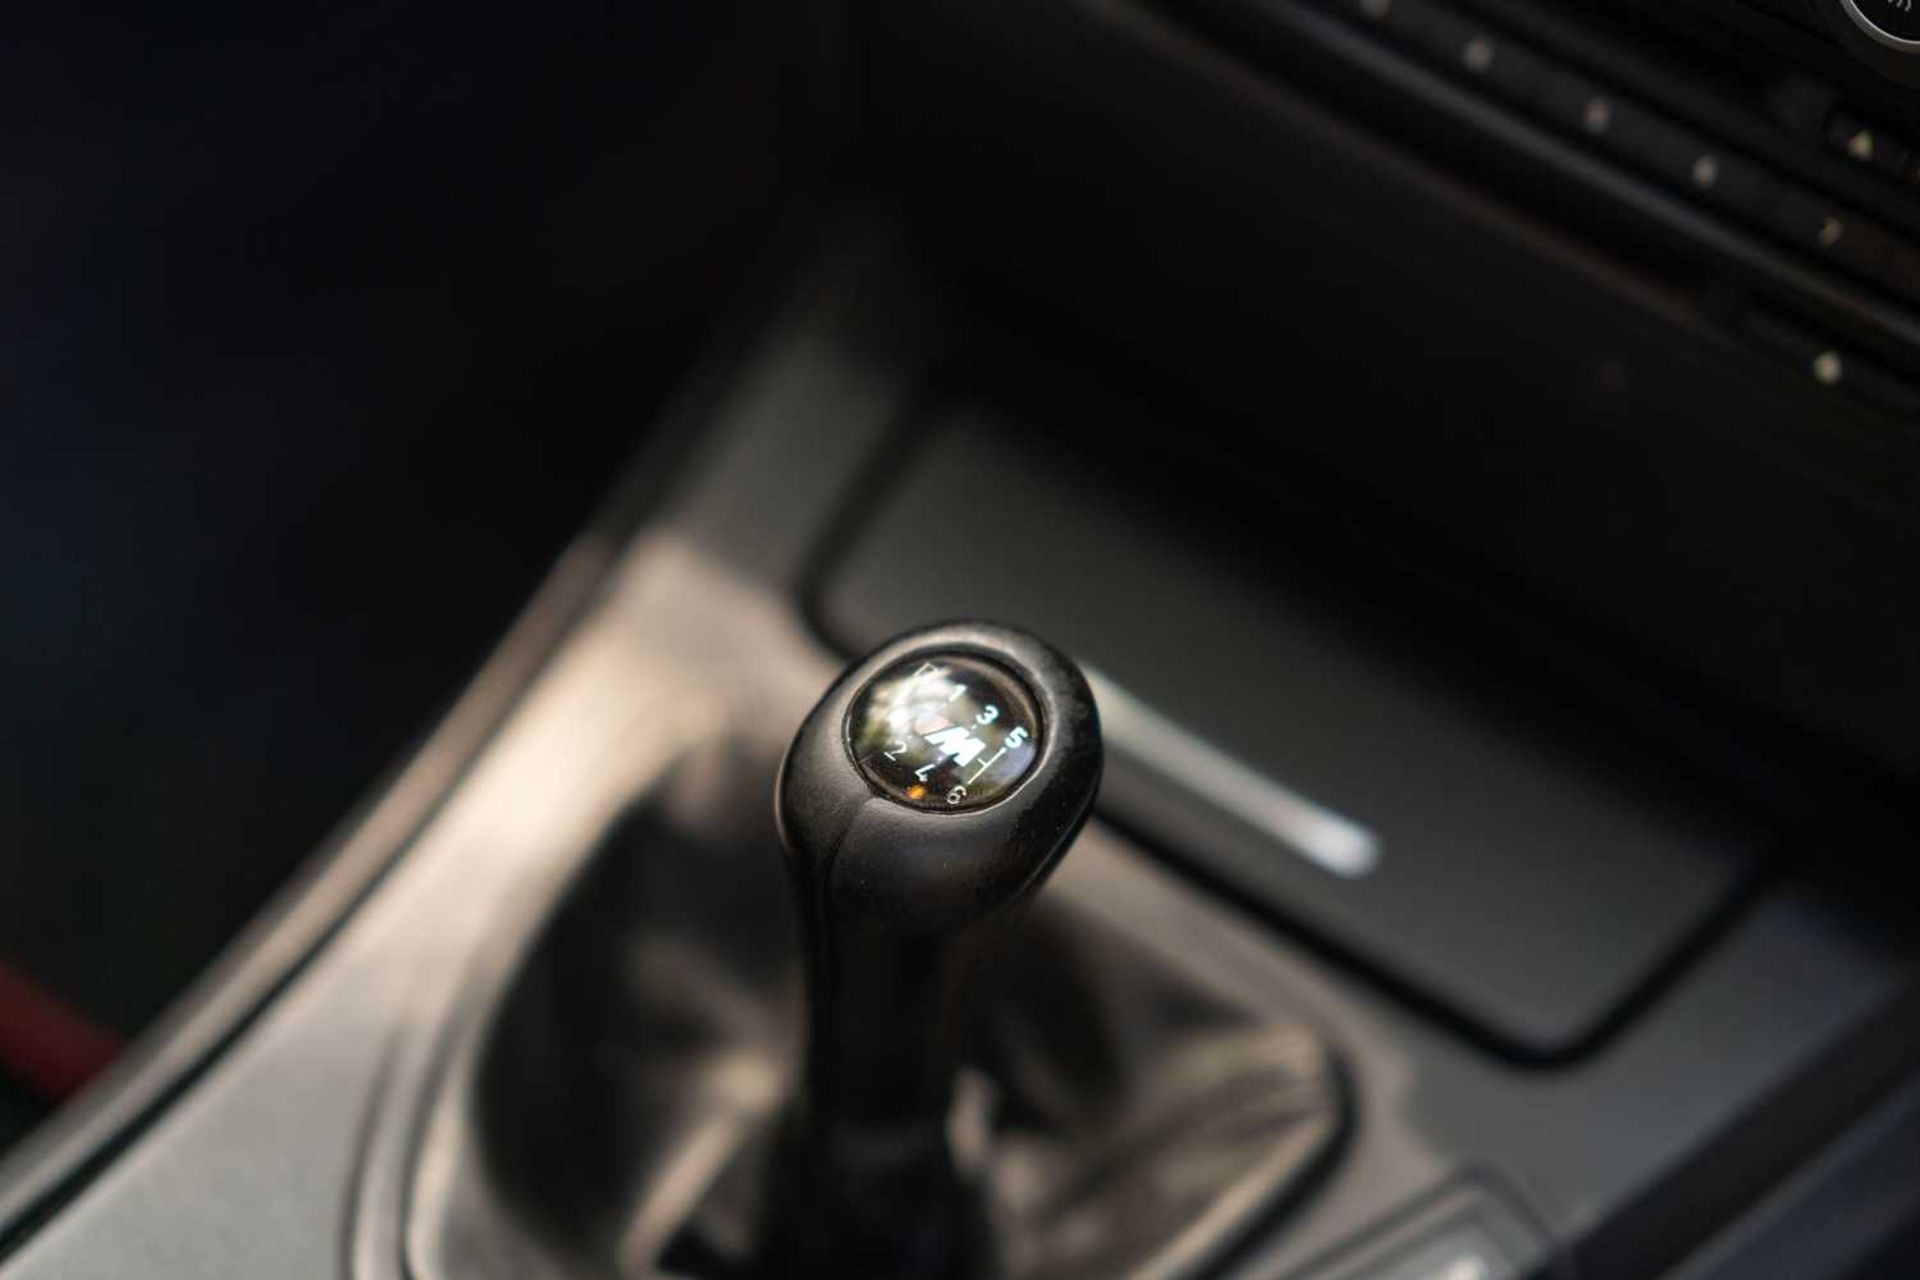 2009 BMW E92 M3  Sought after manual gearbox - Image 49 of 65